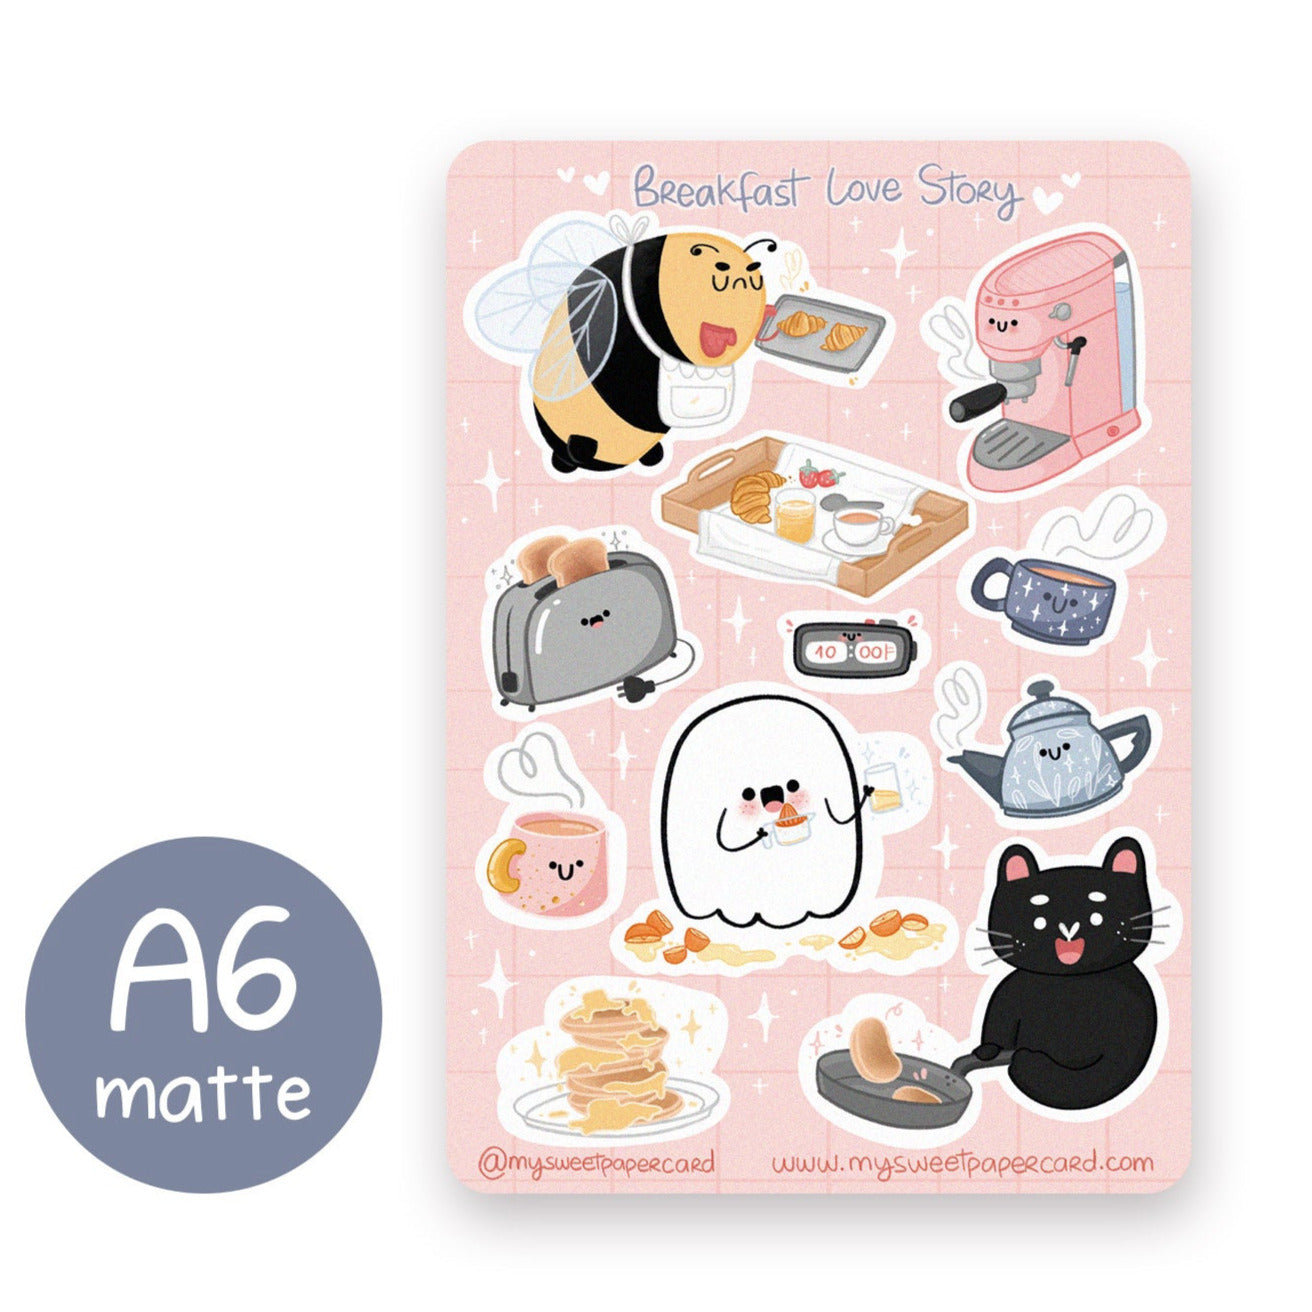 Breakfast Cat Mouse Tiny Stickers